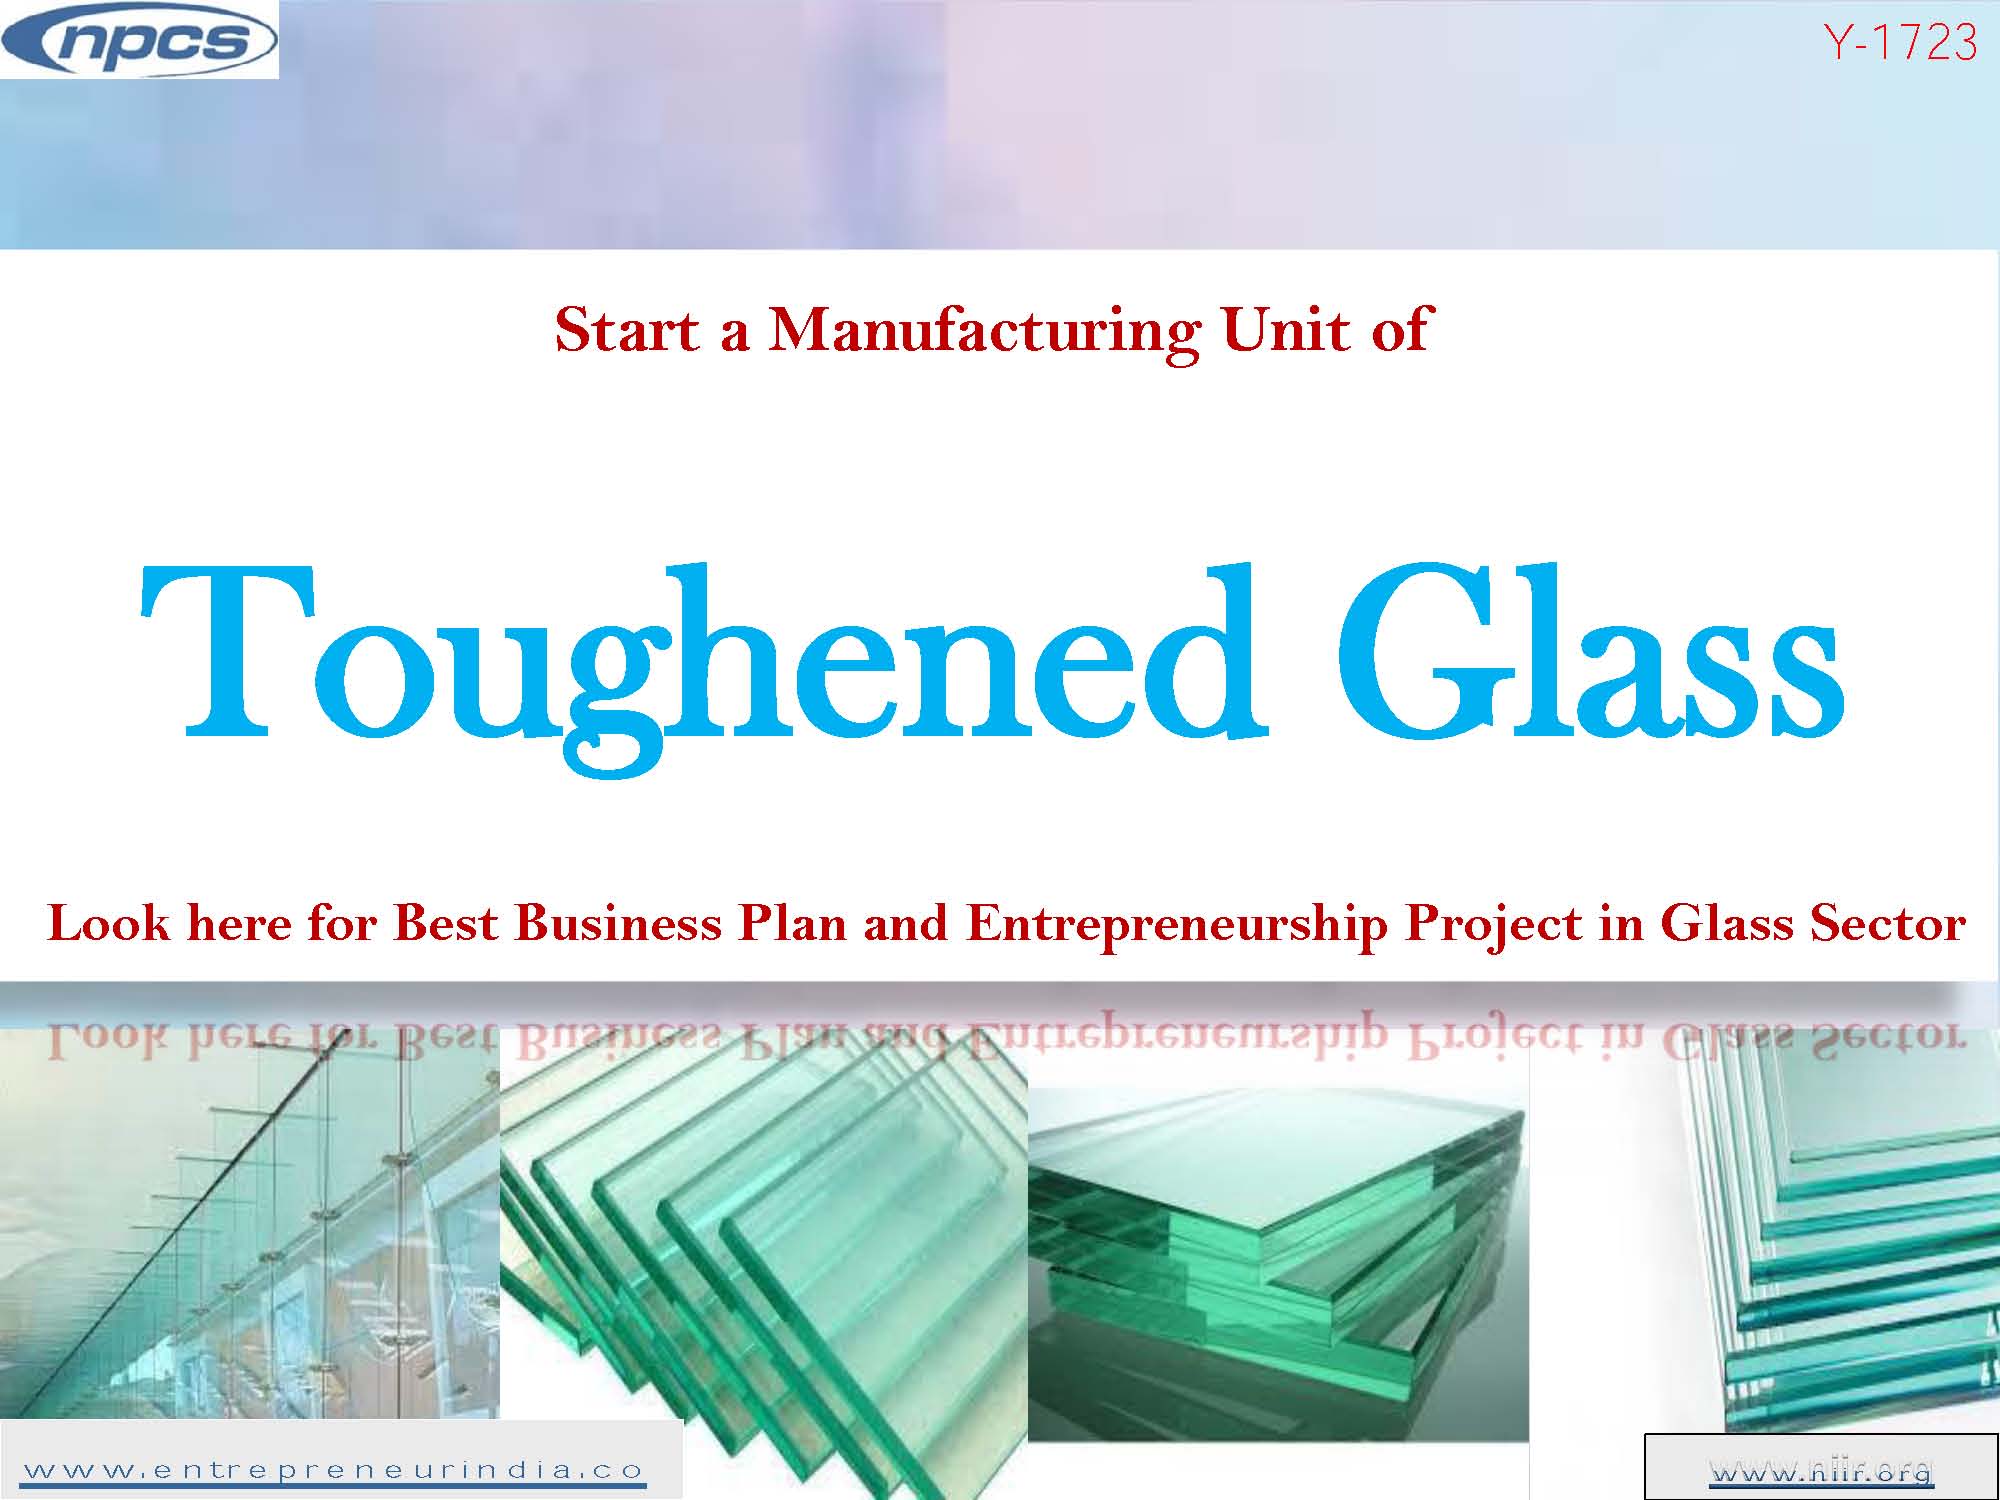 Start a Manufacturing Unit of Toughened Glass Look here for Best Business Plan and Entrepreneurship Project in Glass Sector